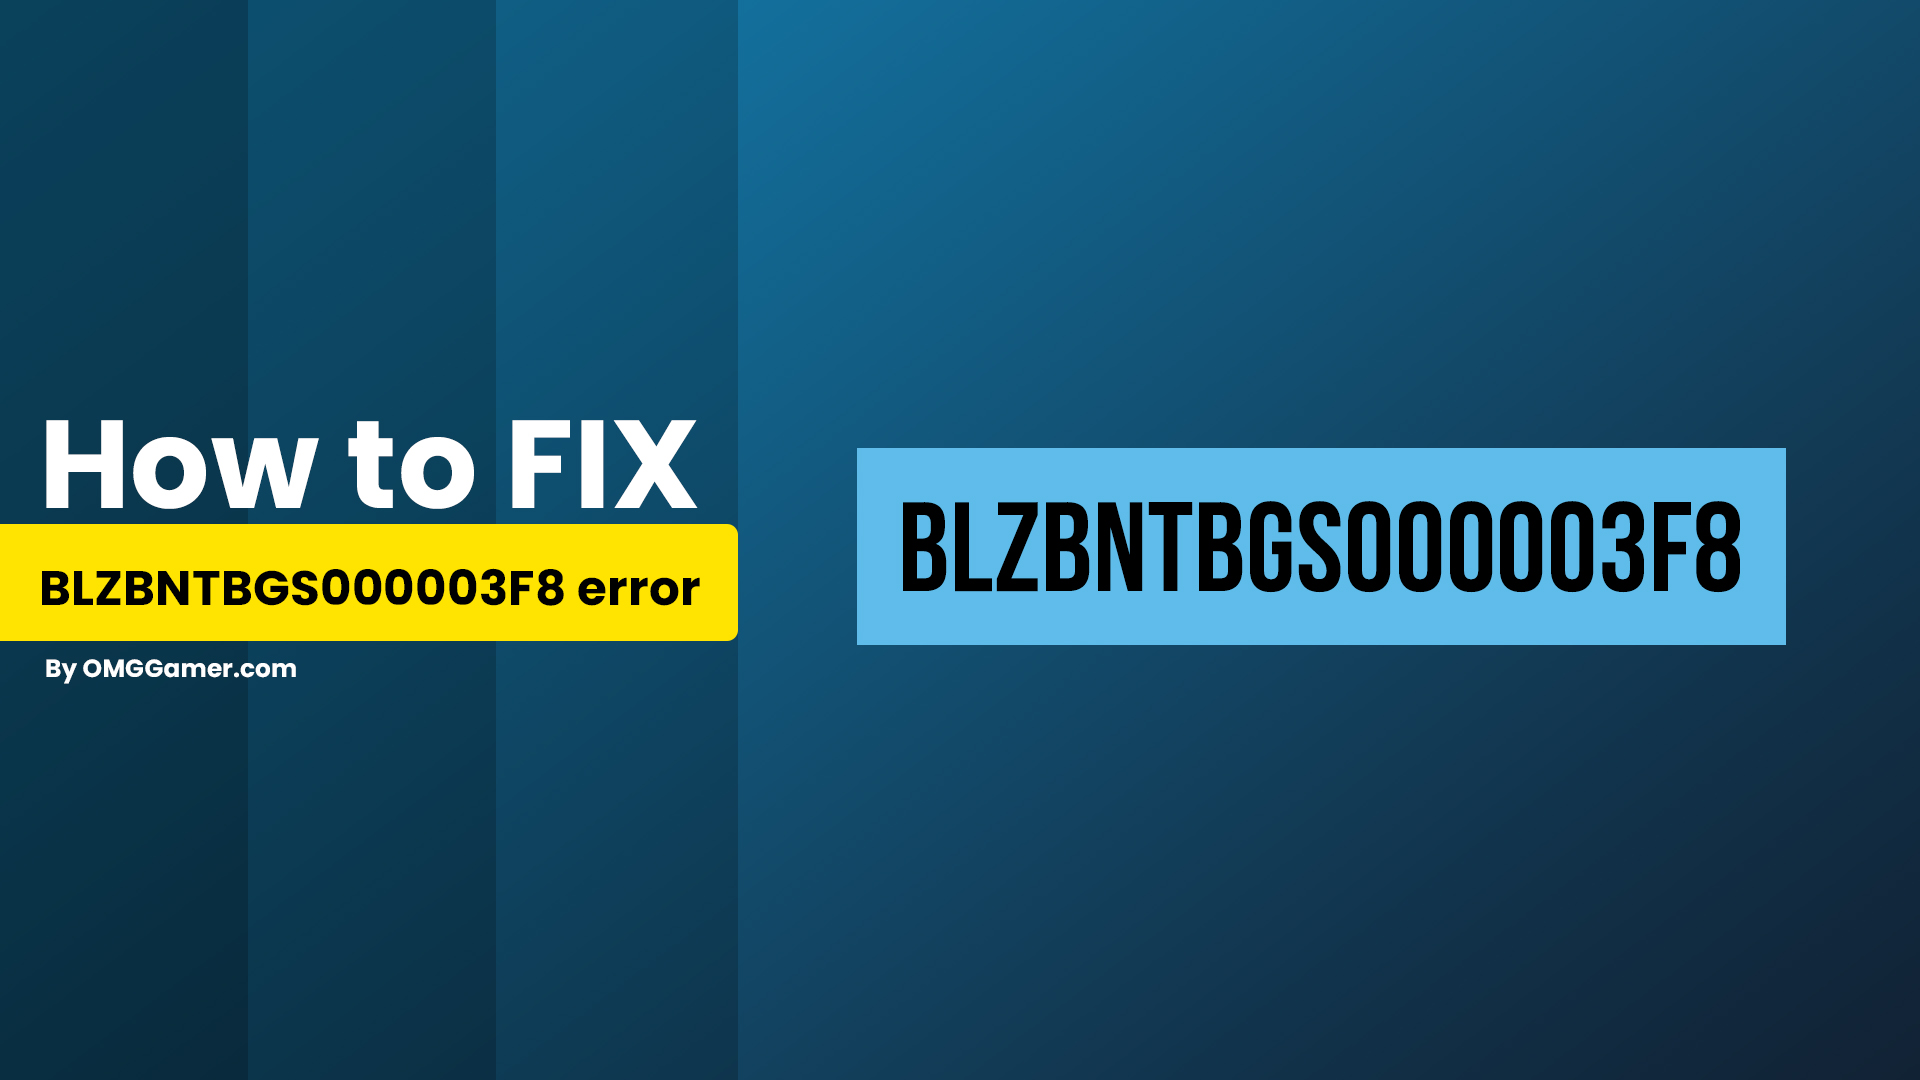 [SOLVED] How to Fix BLZBNTBGS000003F8 Error [Call of Duty]